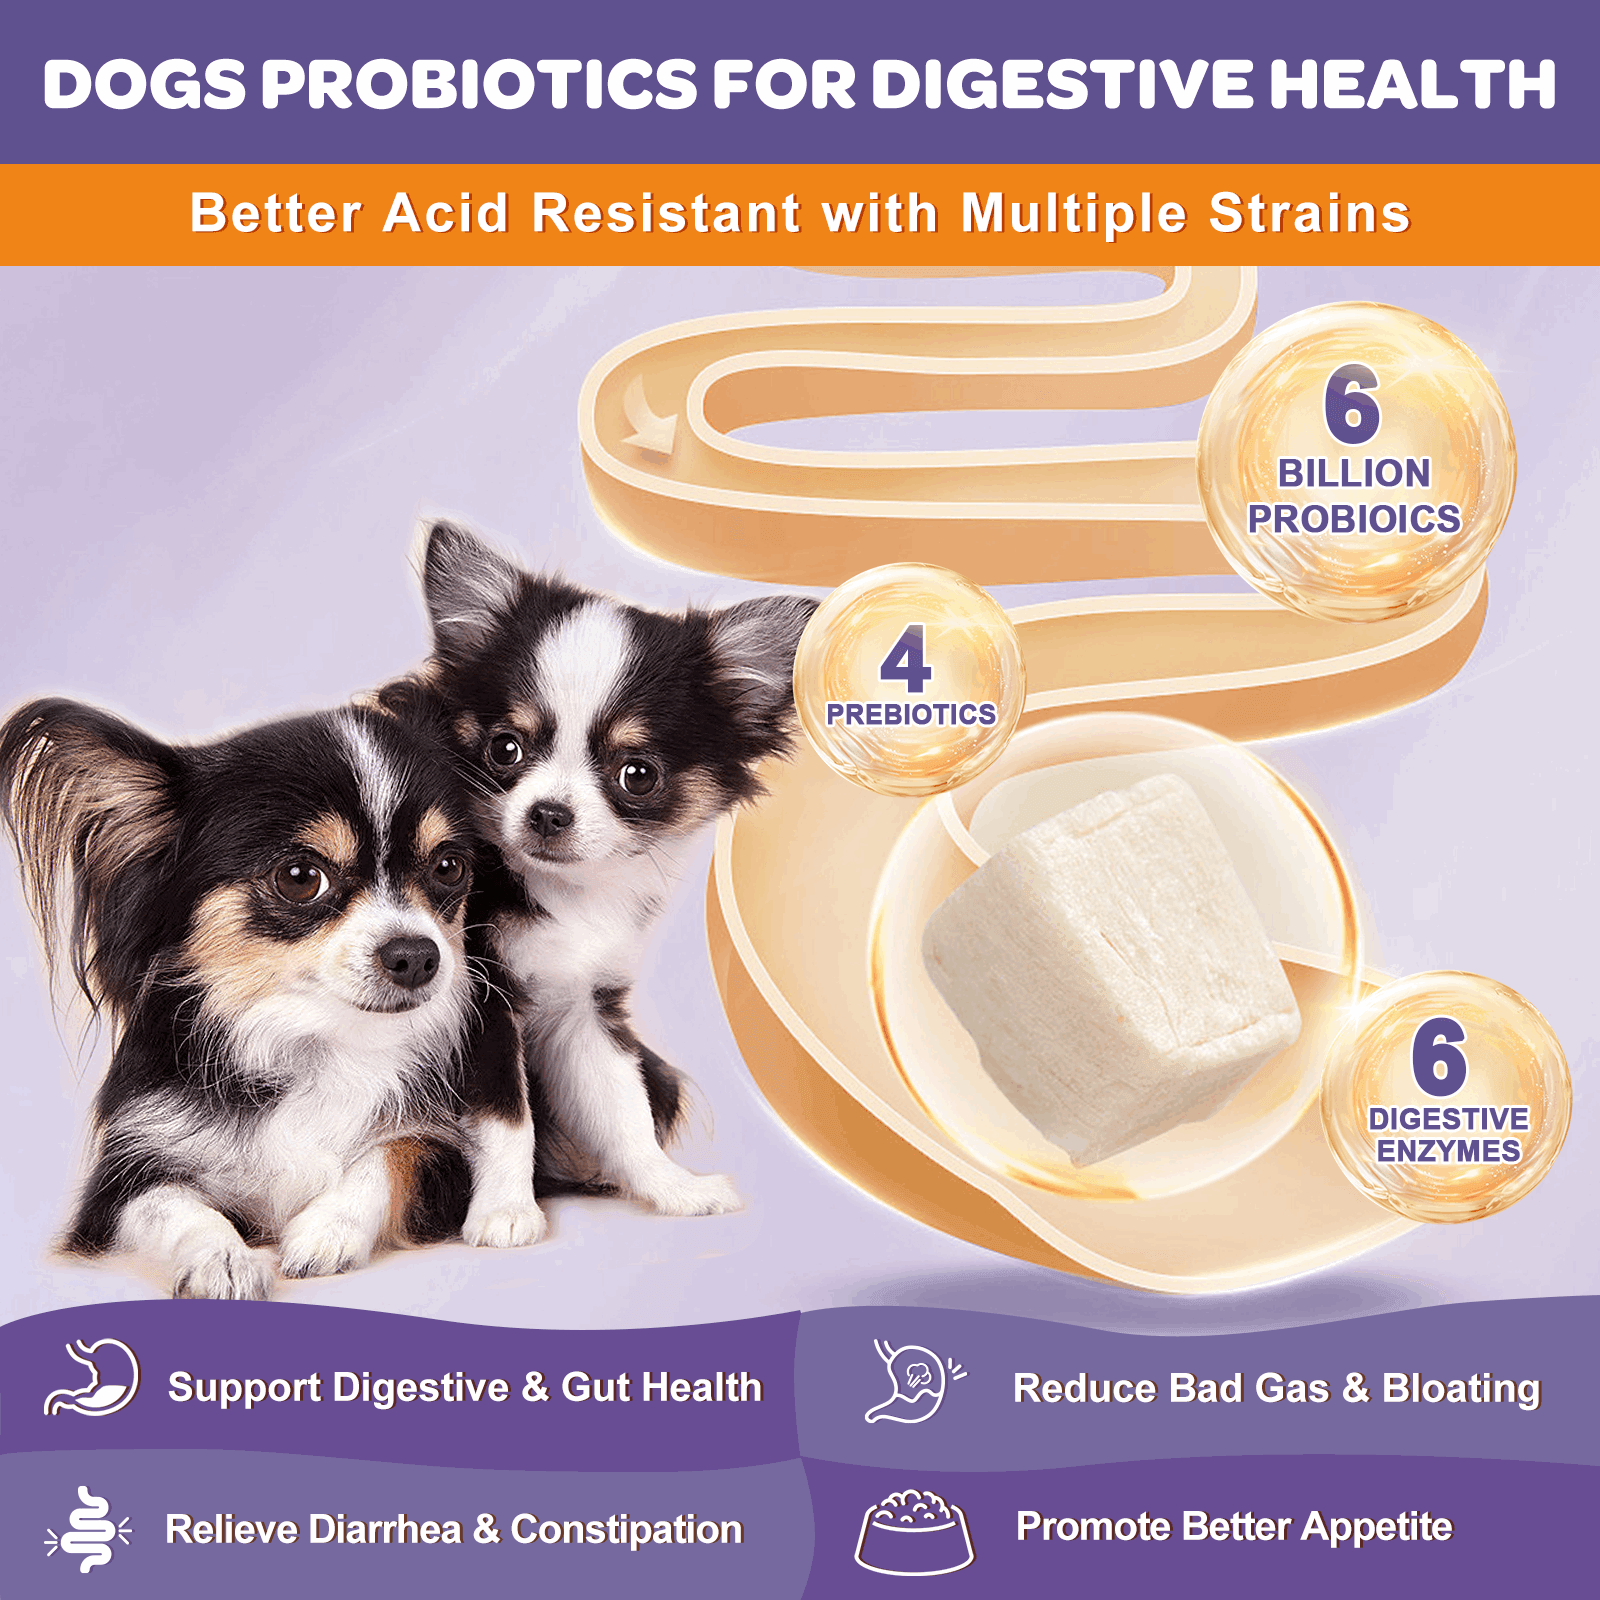 DOGS PROBIOTICS FOR DIGESTIVE HEALTH